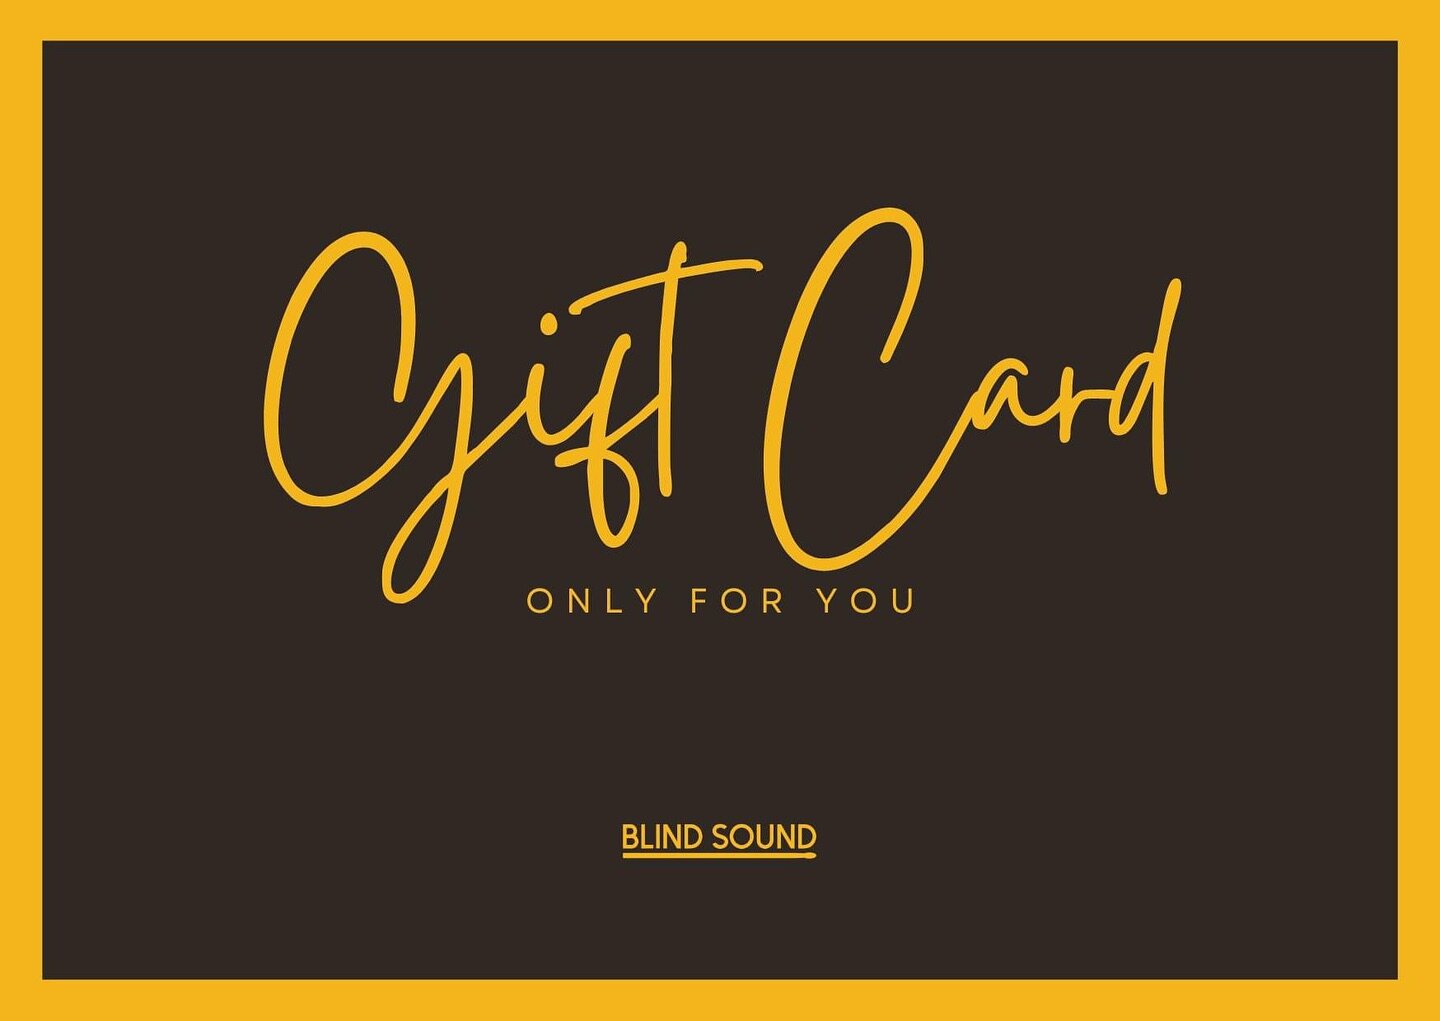 🎁 Don&rsquo;t hit the wrong note with your gifts! 
🎶 Give your loved ones the gift of musical bliss.
 Write to us for more info on our exclusive Gift Cards available for rehearsal spaces, drum lessons and recording! #blindsoundstudio